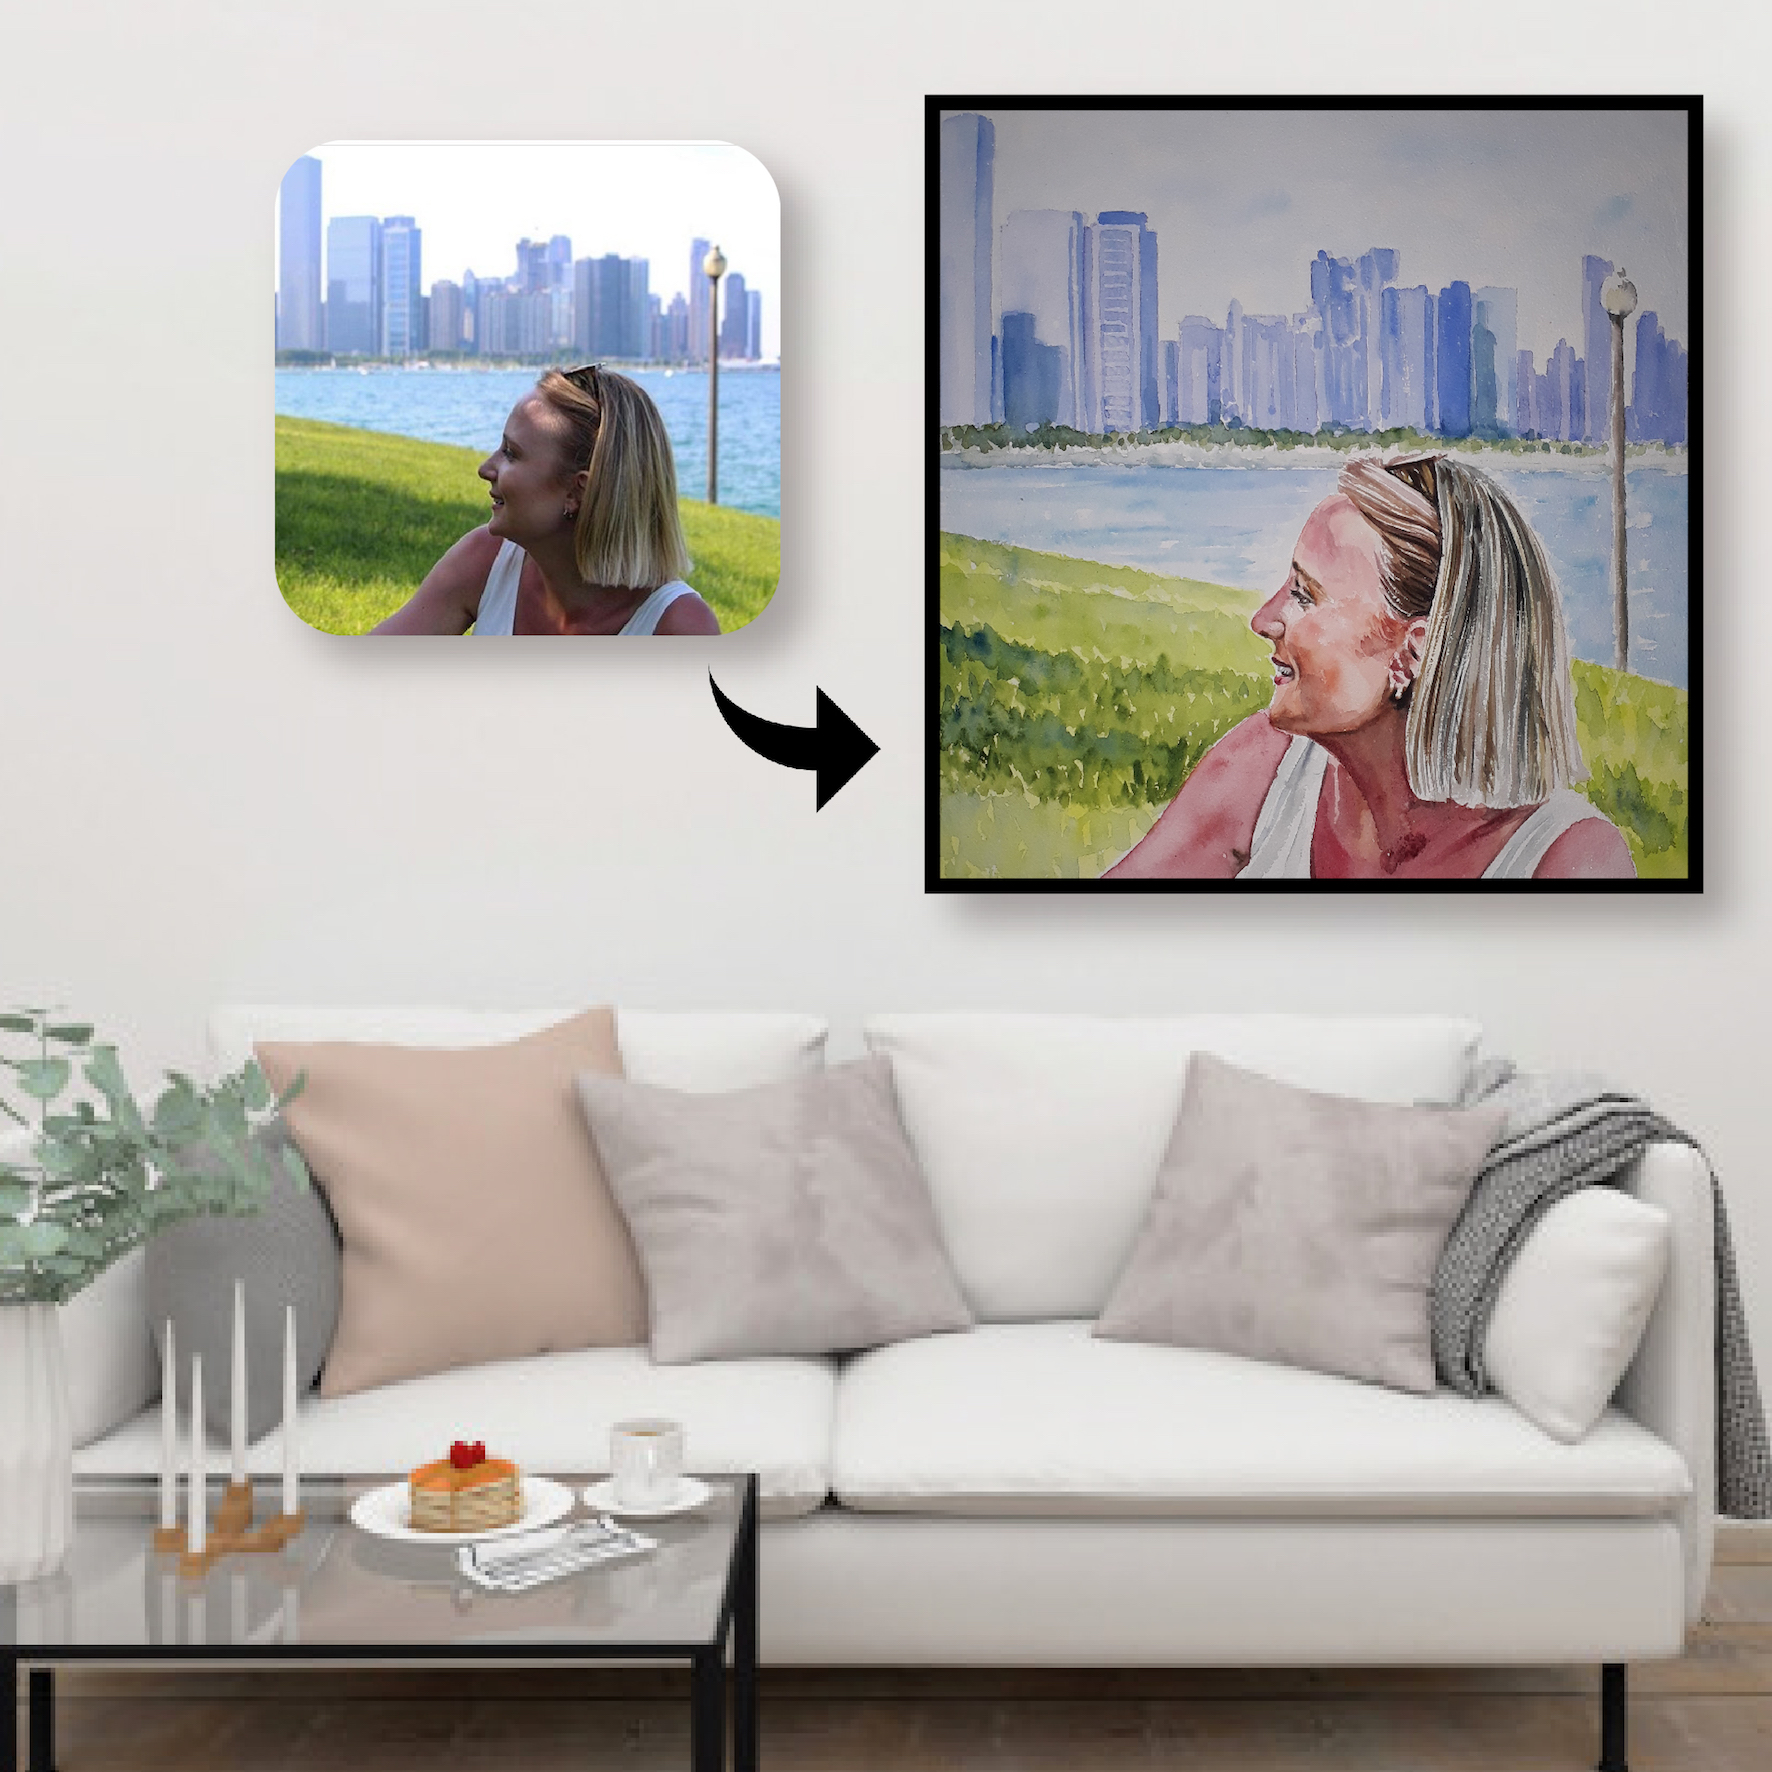 Ever heard of PortraitFlip? PortraitFlip is the one stop to turn photo into paintings and turn our moments into beautiful memories #memories #photo #portrait #painting #portraitflip #canvasprint #charcoalsketch #travelmemories